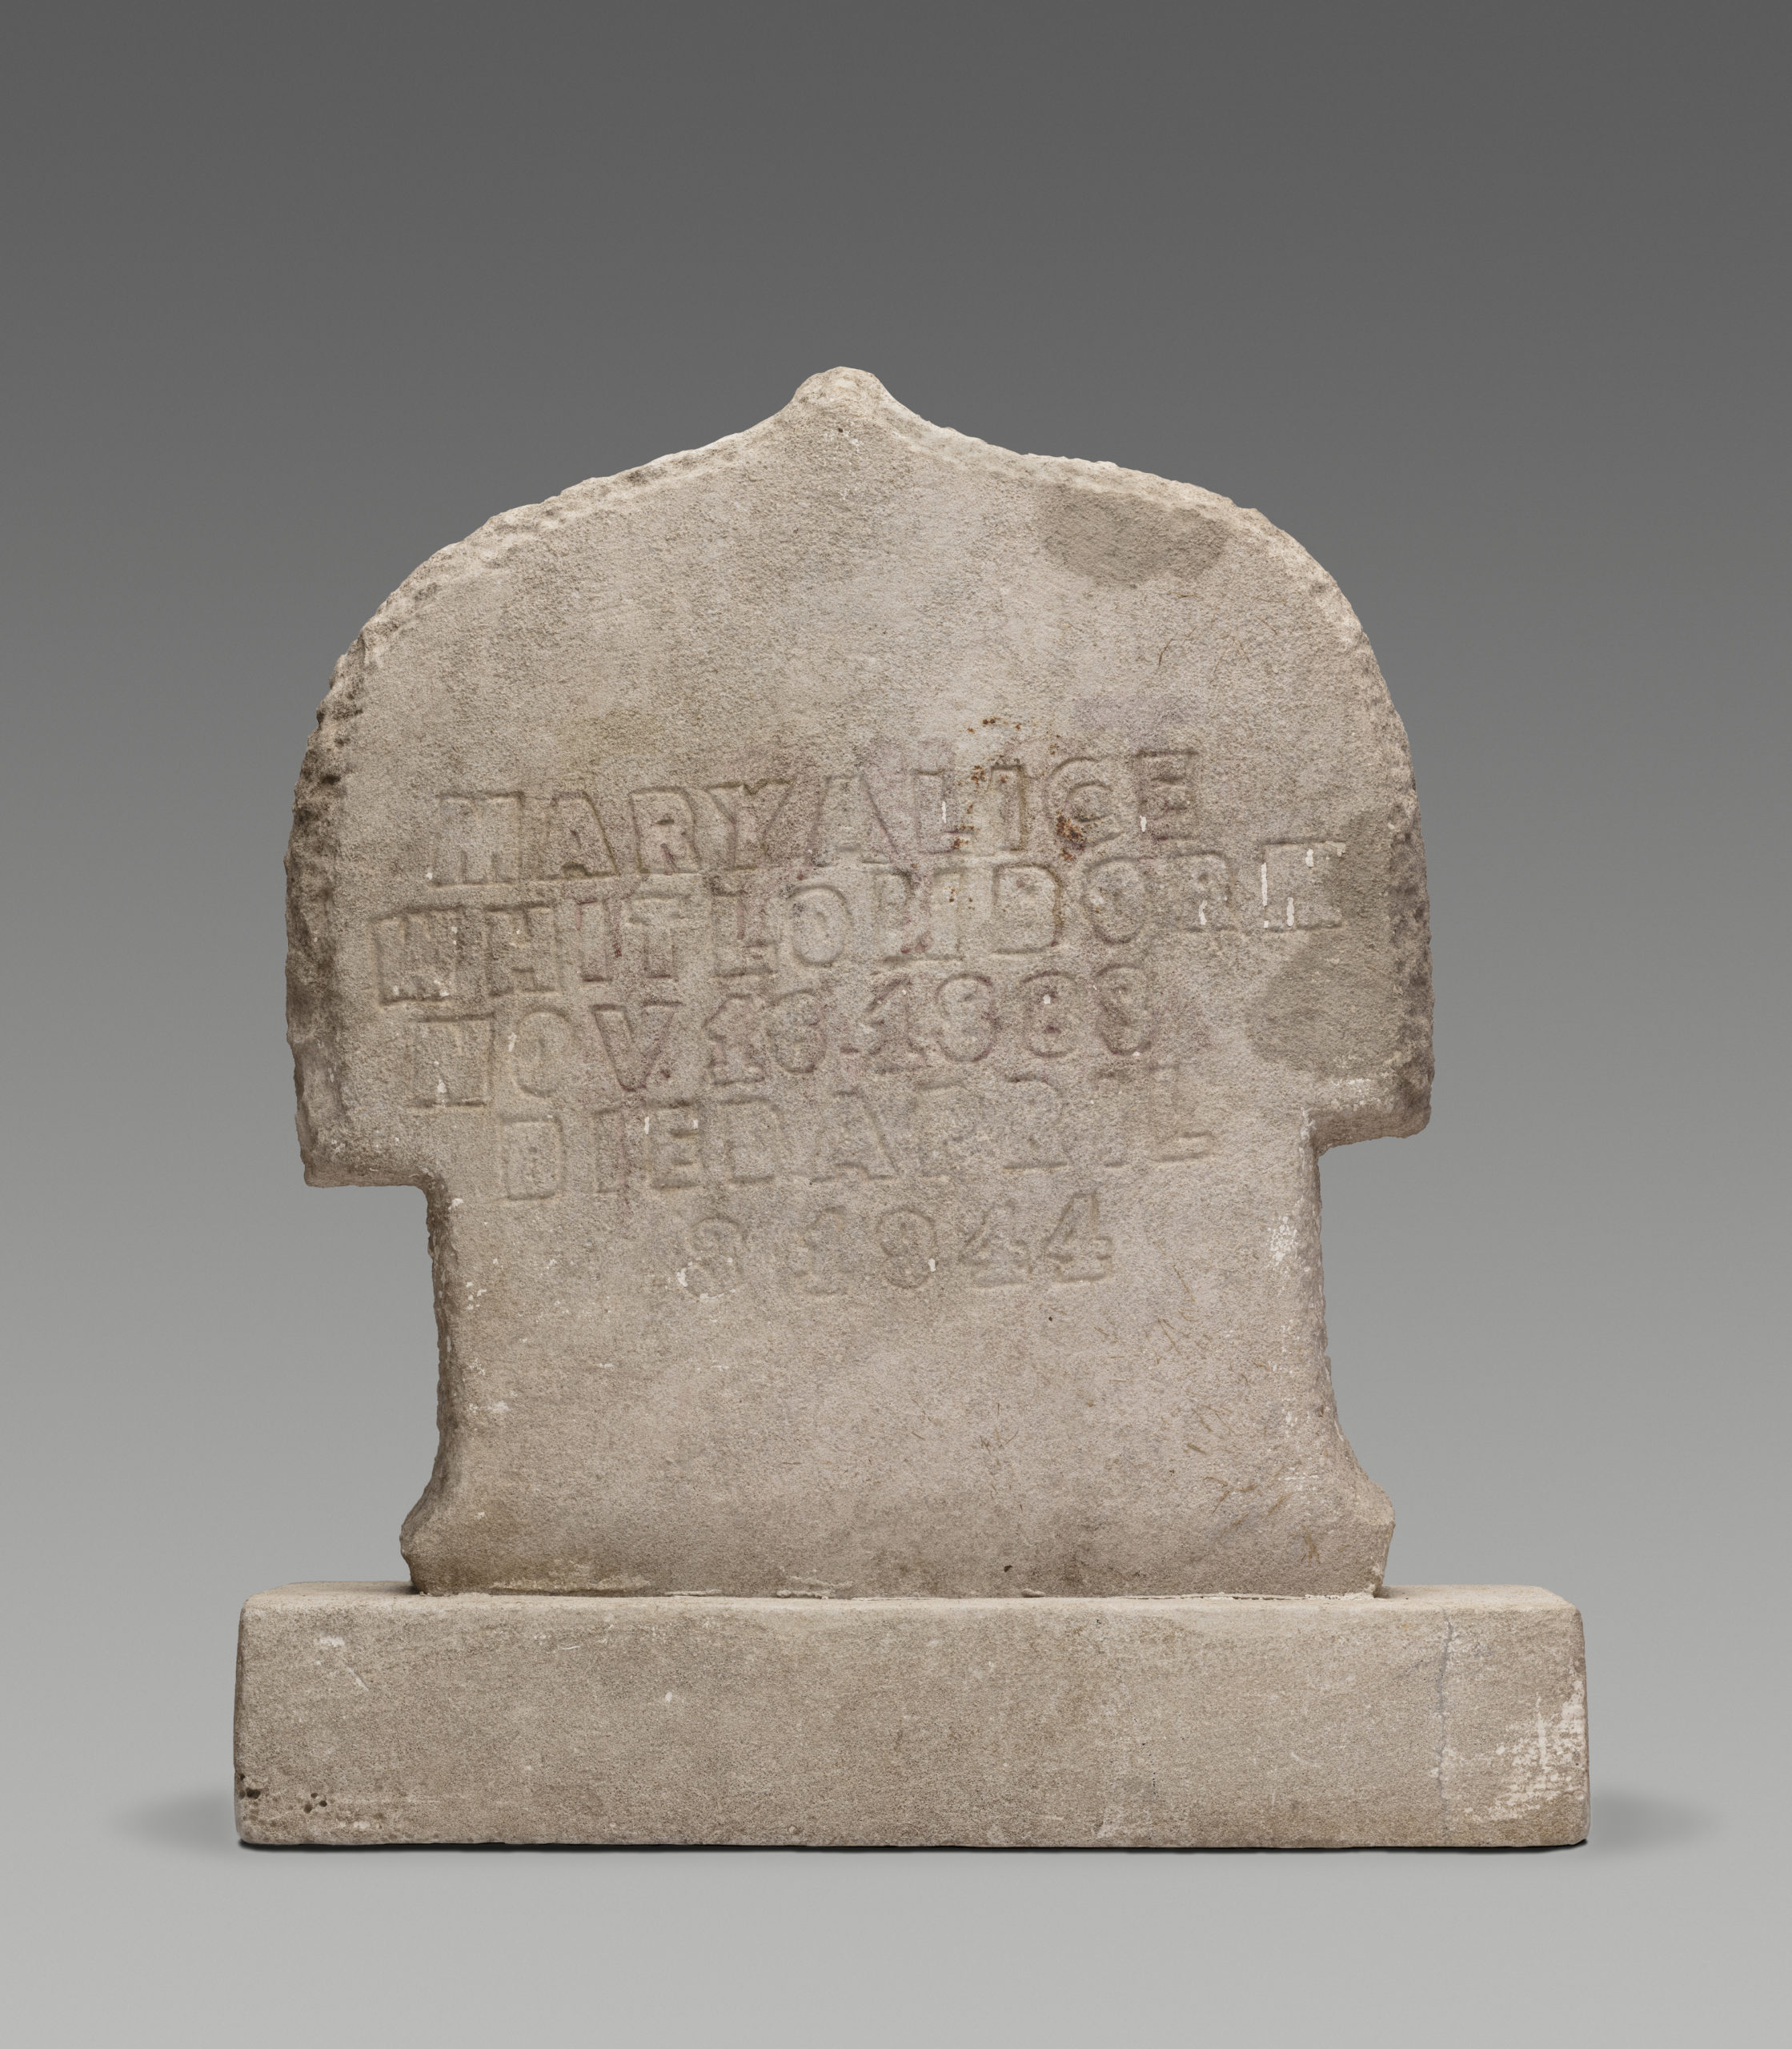 Limestone tombstone carved by William Edmondson. Etching in limestone says Mary Alice Whitlow, Born Nov. 16, 1888